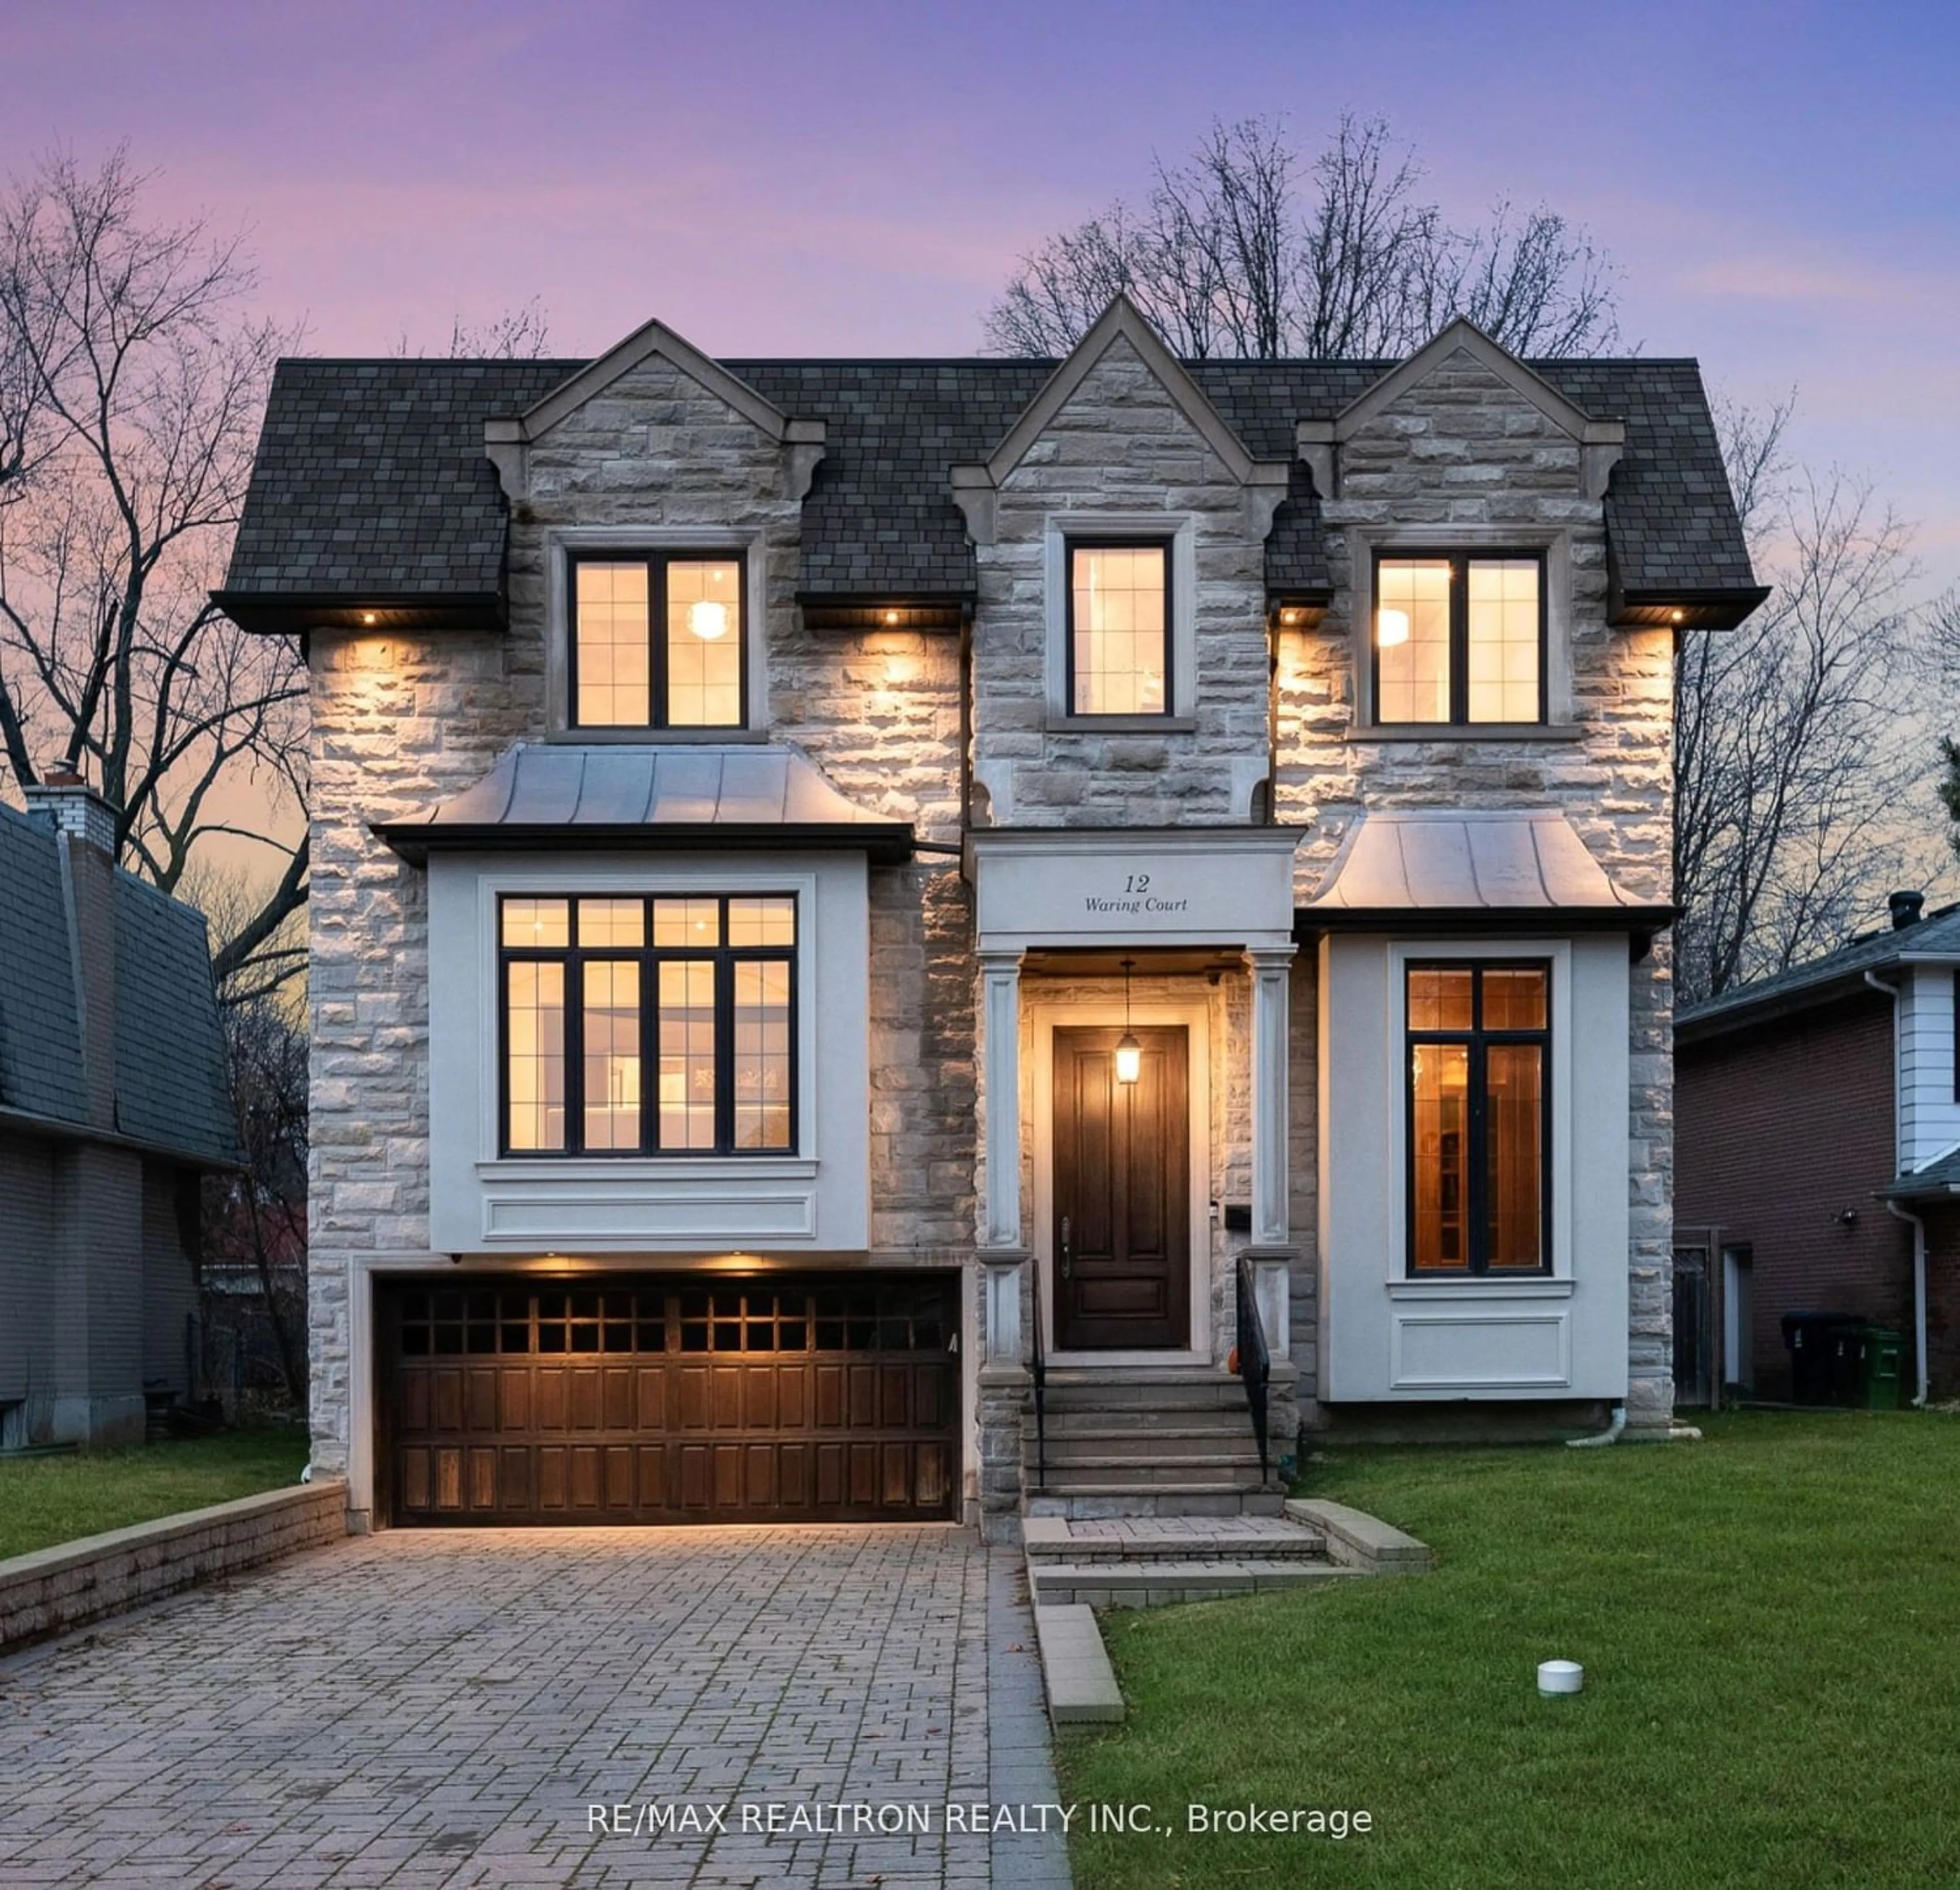 Home with brick exterior material for 12 Waring Crt, Toronto Ontario M2N 4G7